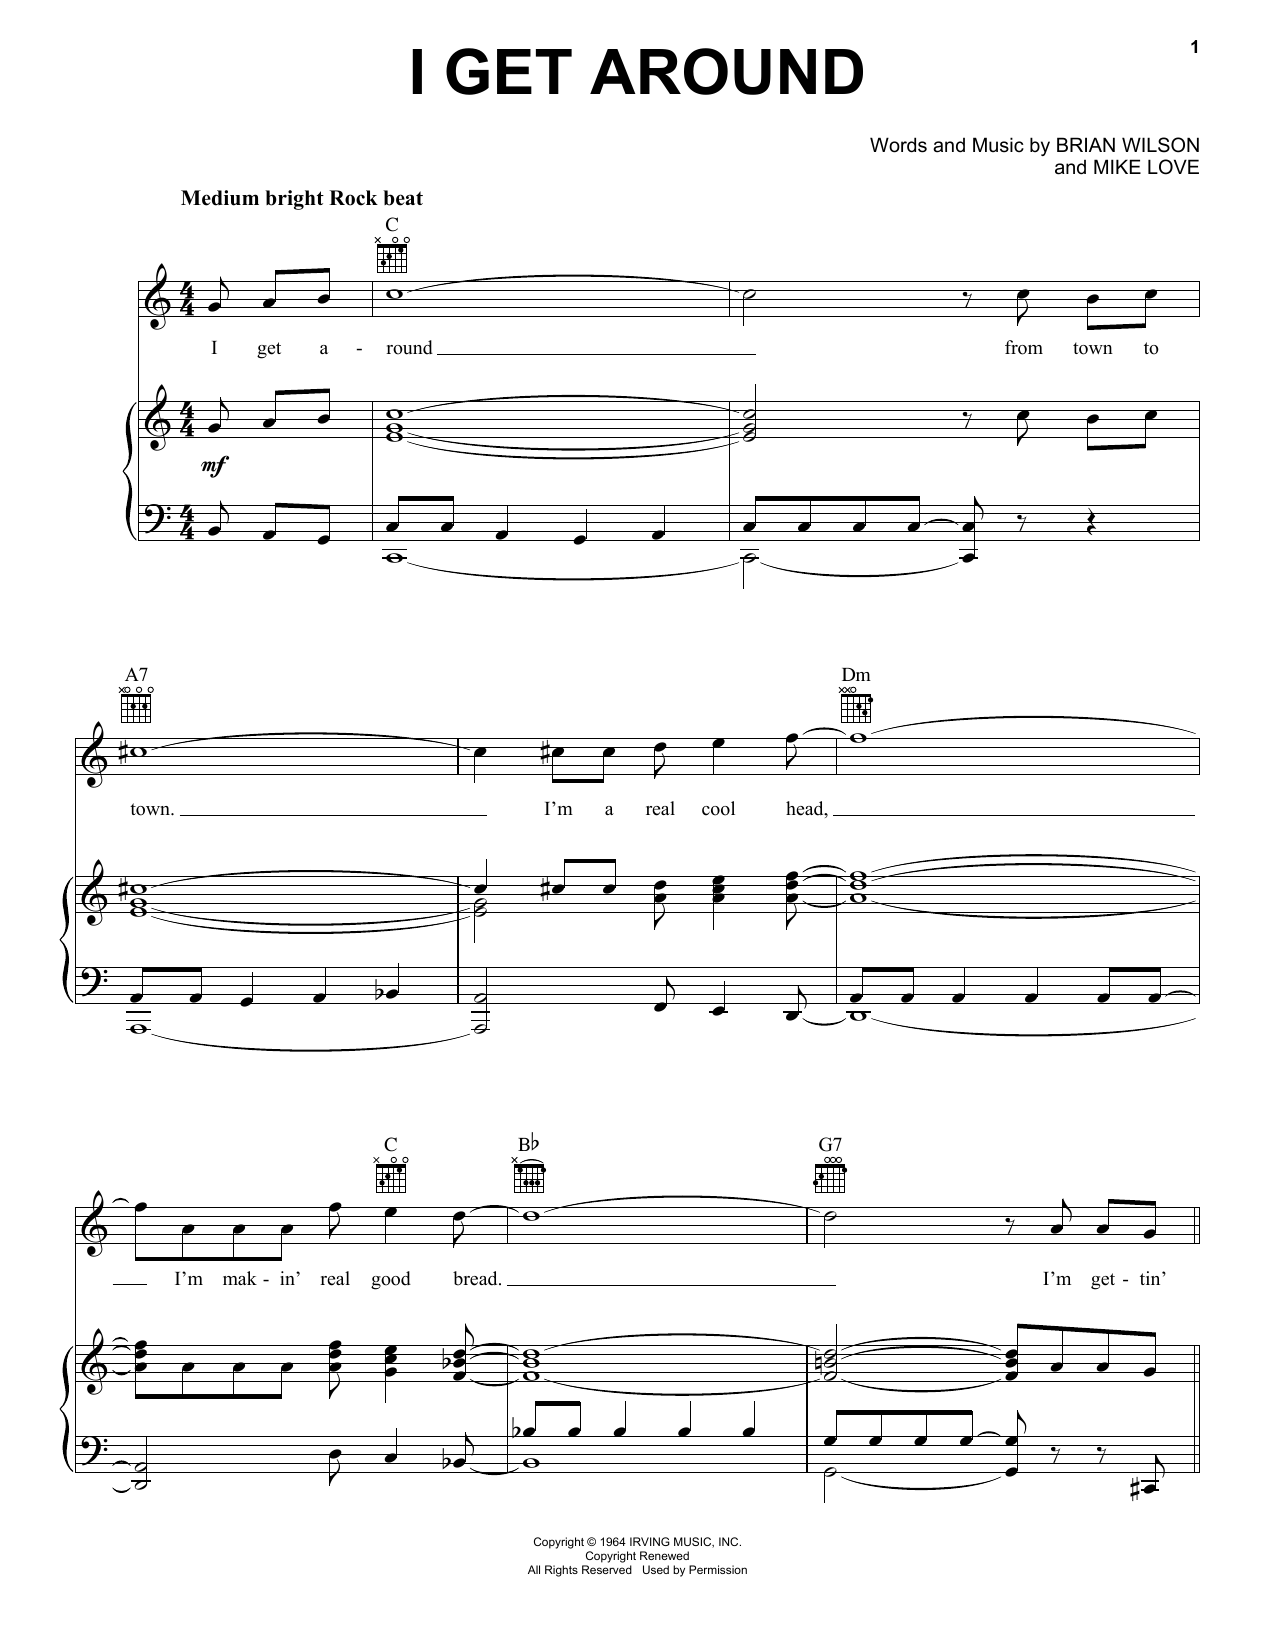 The Beach Boys I Get Around sheet music notes and chords. Download Printable PDF.